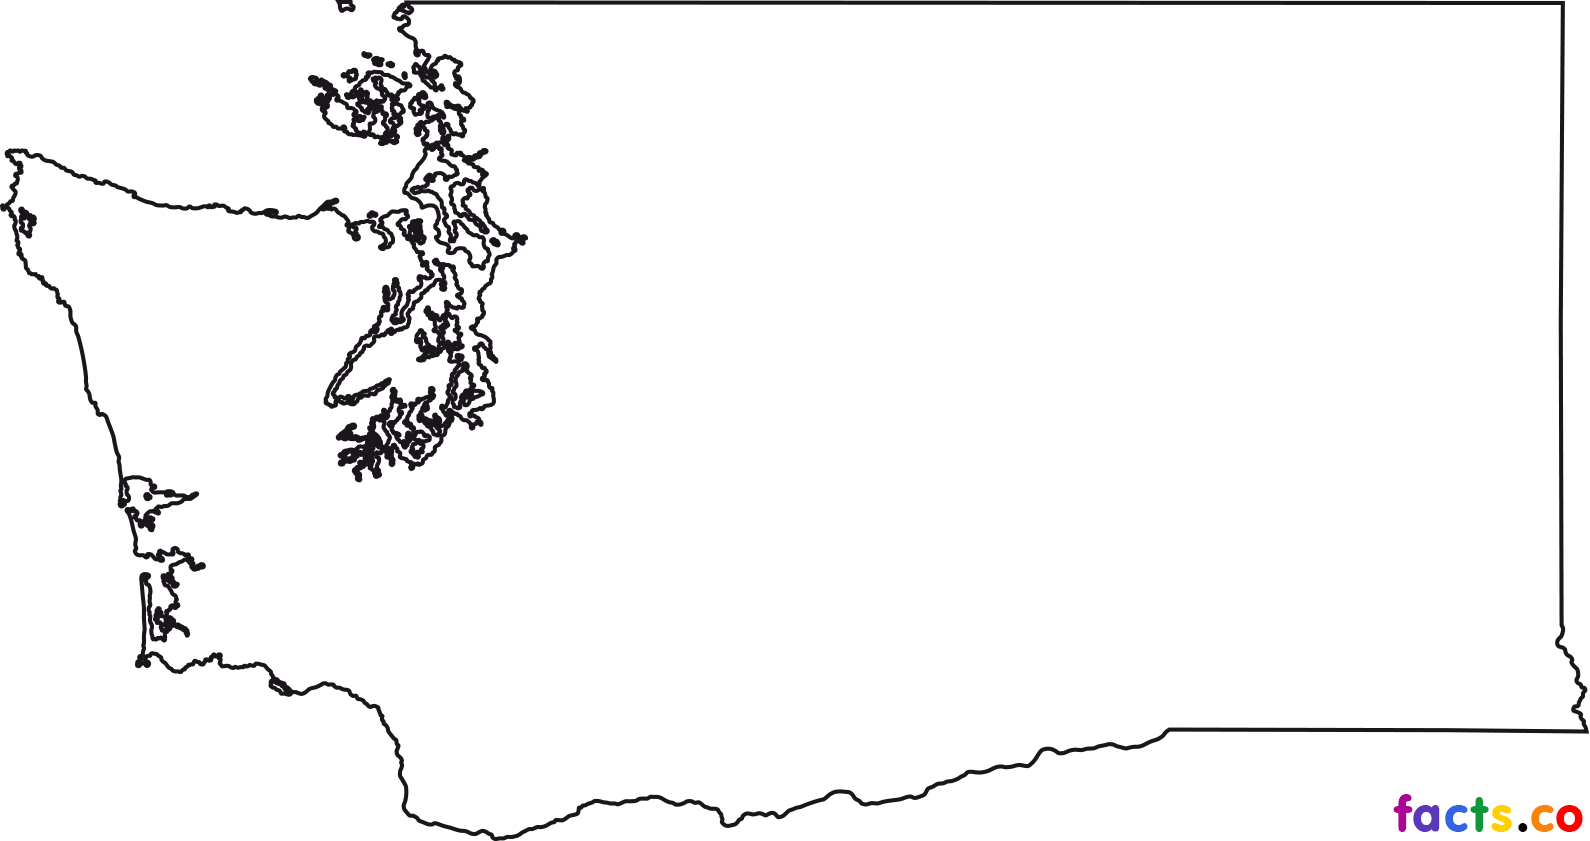 Washington State Outline Clipart.